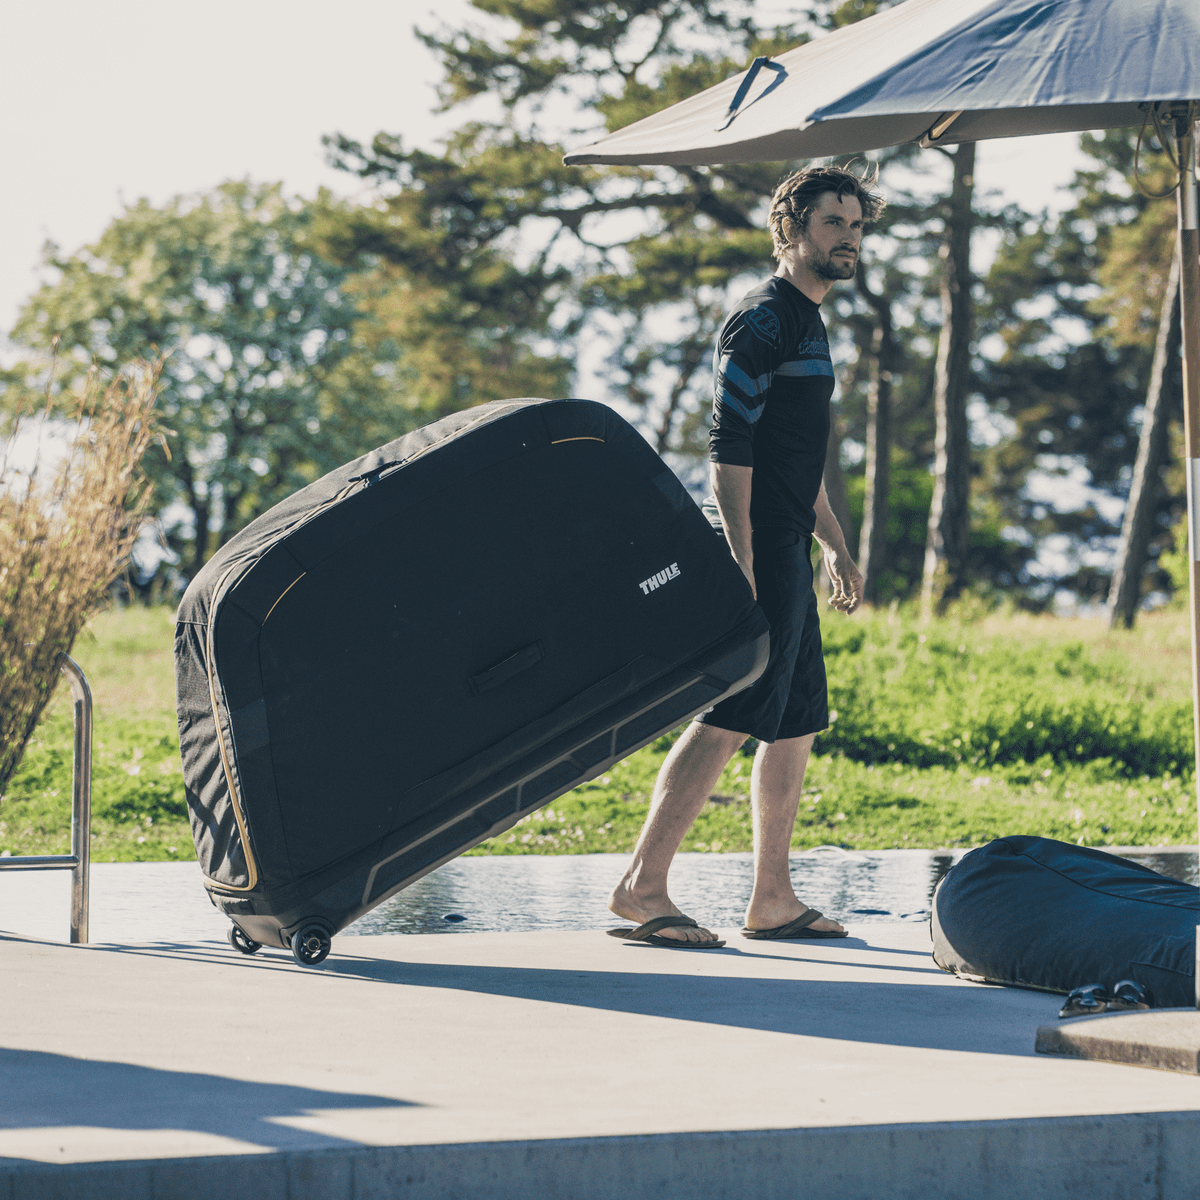 In a garden, a man pulls his black Thule Roundtrip MTB bike travel case with wheels.